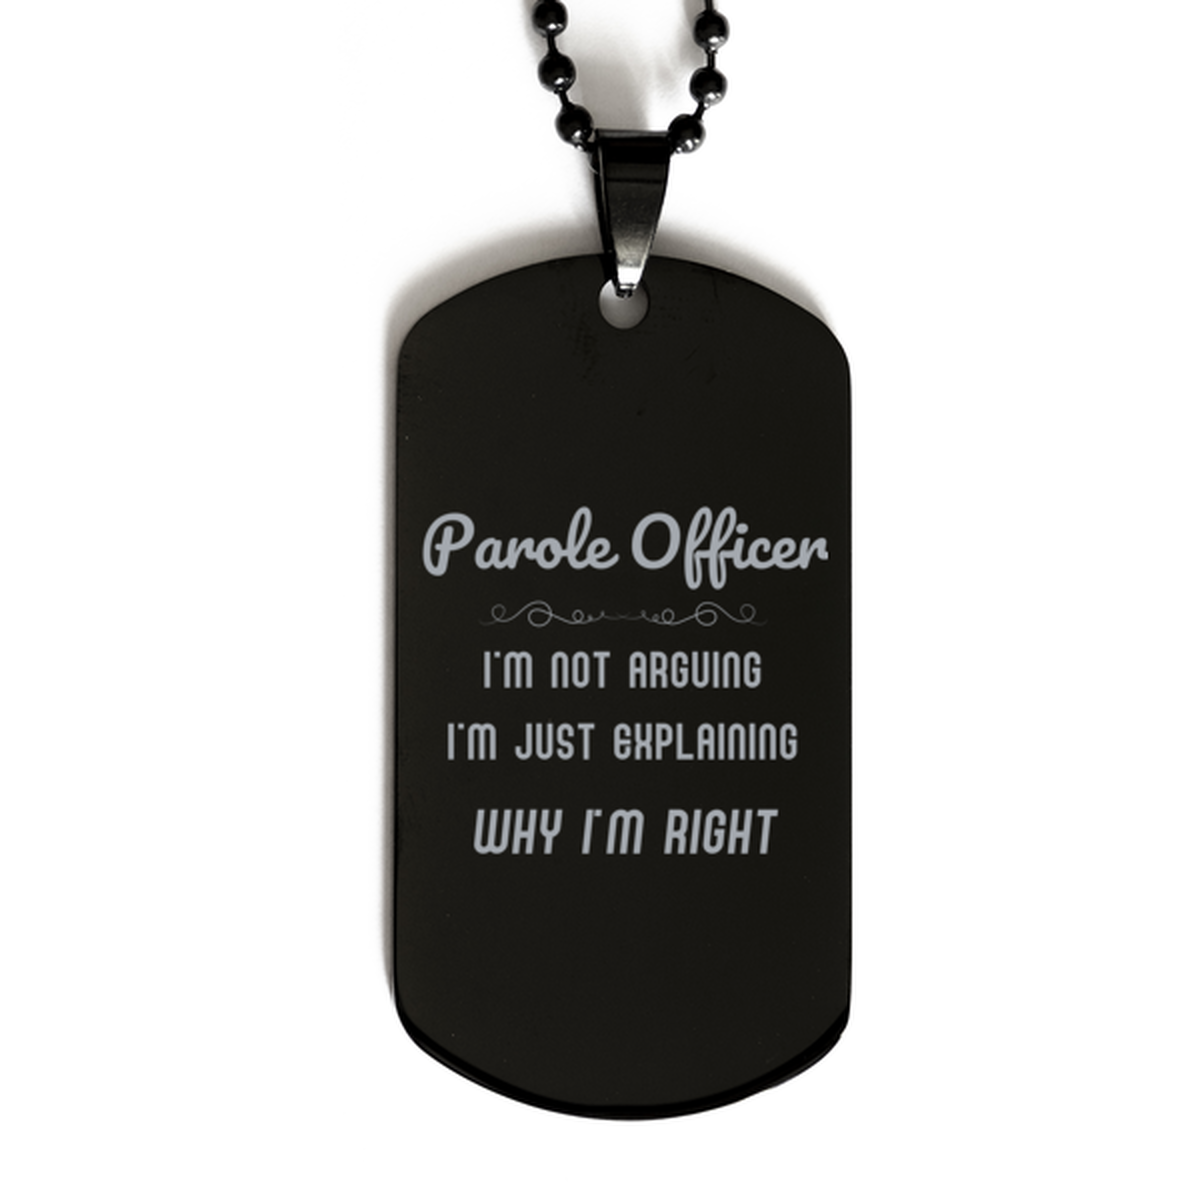 Parole Officer I'm not Arguing. I'm Just Explaining Why I'm RIGHT Black Dog Tag, Funny Saying Quote Parole Officer Gifts For Parole Officer Graduation Birthday Christmas Gifts for Men Women Coworker